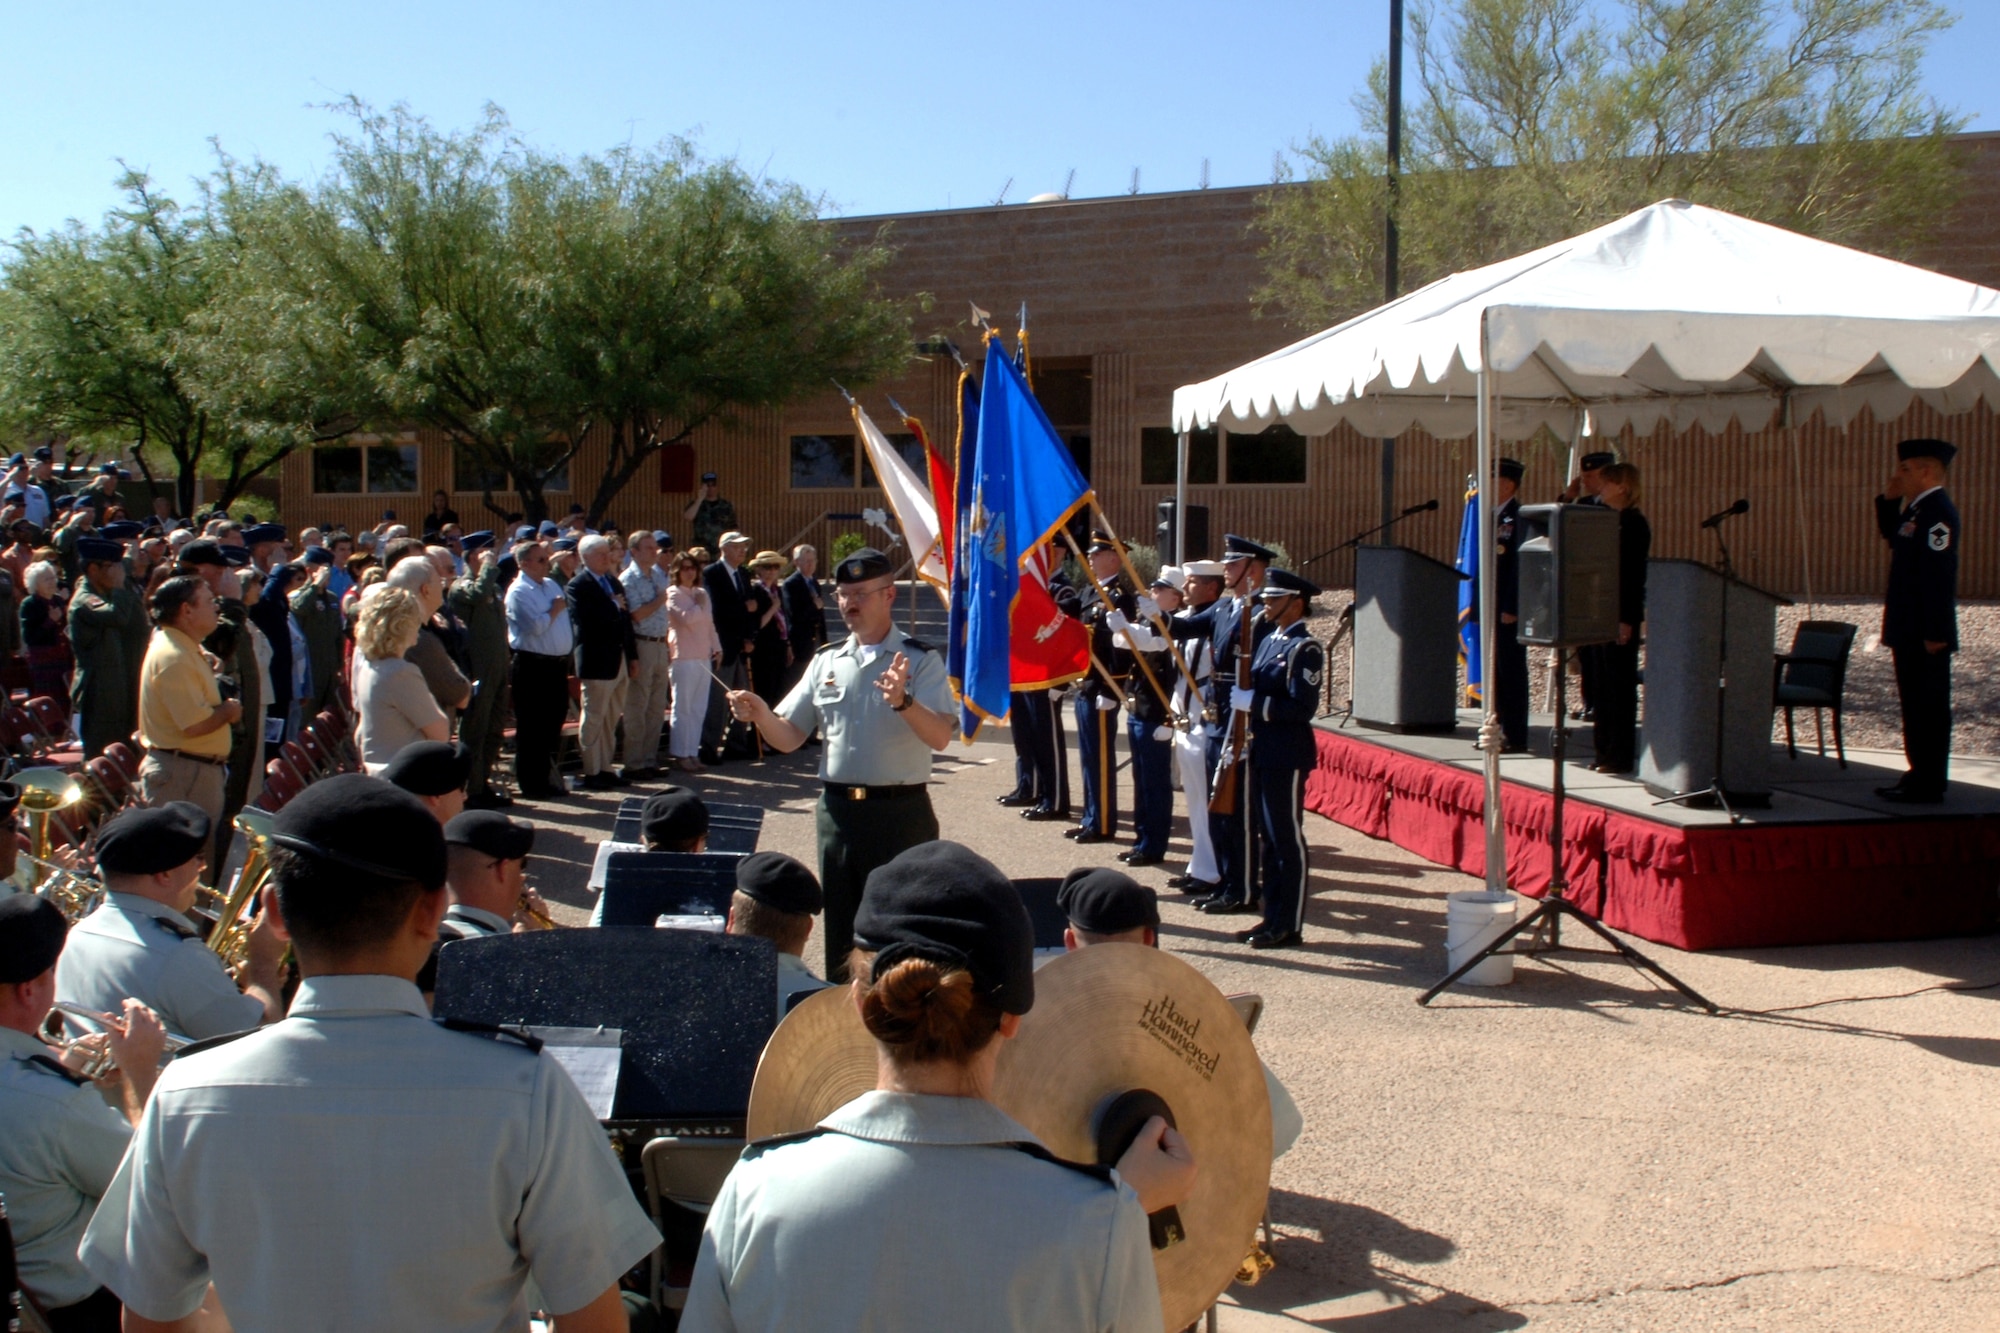 More than 200 military and civilians salute the U.S. flag as the national anthem is played by the 36th Army Band, May 9, during a ribbon cutting ceremony held for the unveiling of the new James H. Doolittle Combined Air and Space Operations Center at Davis-Monthan Air Force. The building was named in honor of General James H. Doolittle, 12th Air Force’s first commander and the Doolittle Raiders for their heroic actions during World War II.  Photo by Tech. Sgt. Kerry Jackson
